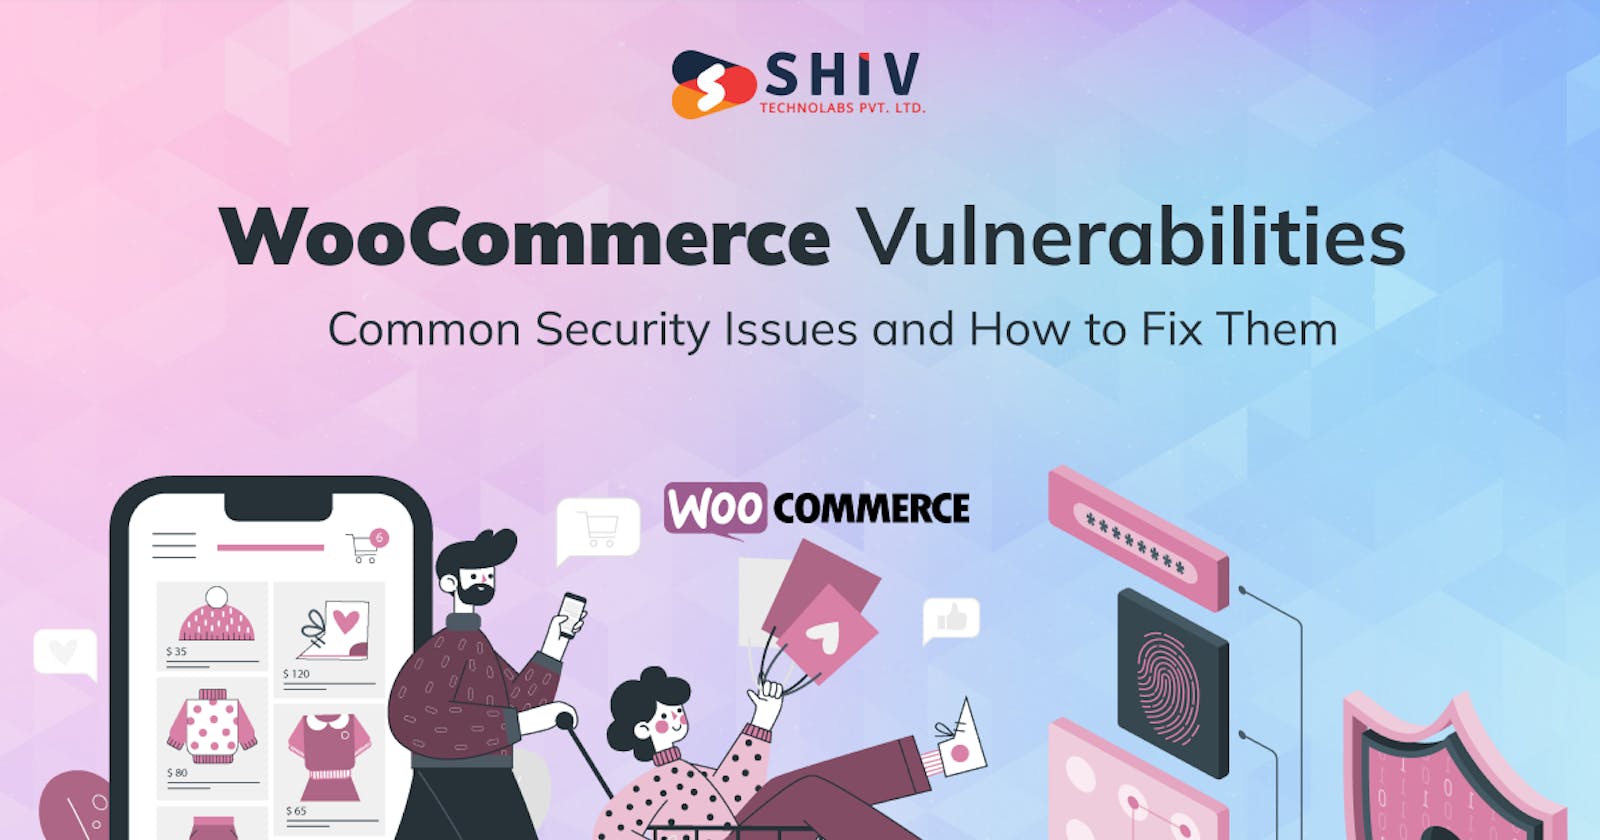 WooCommerce Vulnerabilities: Common Security Issues and How to Fix Them